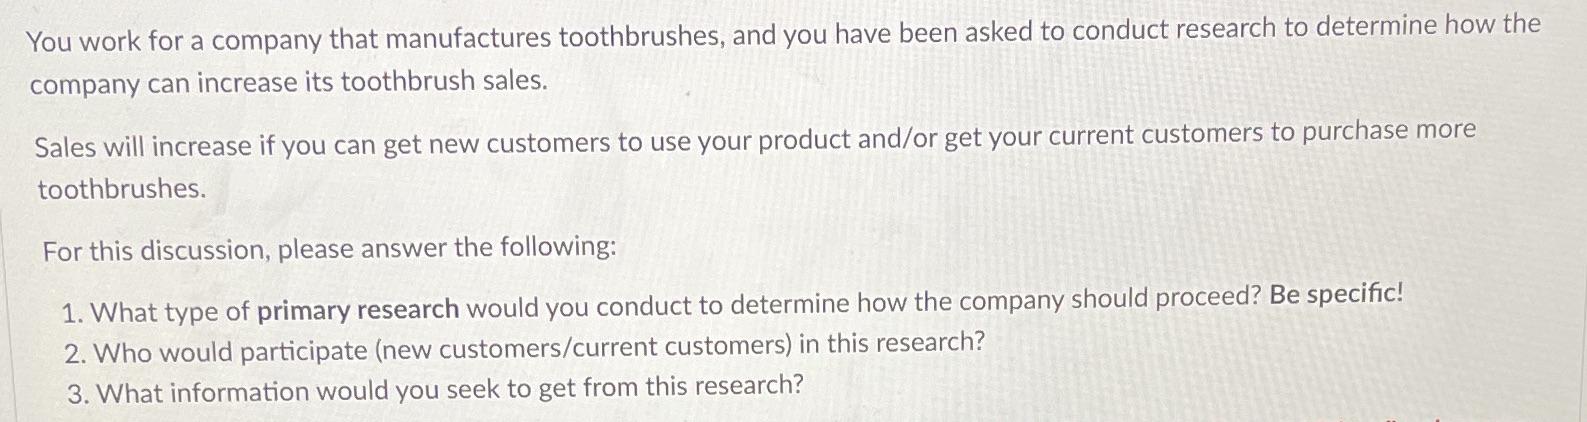 You work for a company that manufactures toothbrushes, and you have been asked to conduct research to